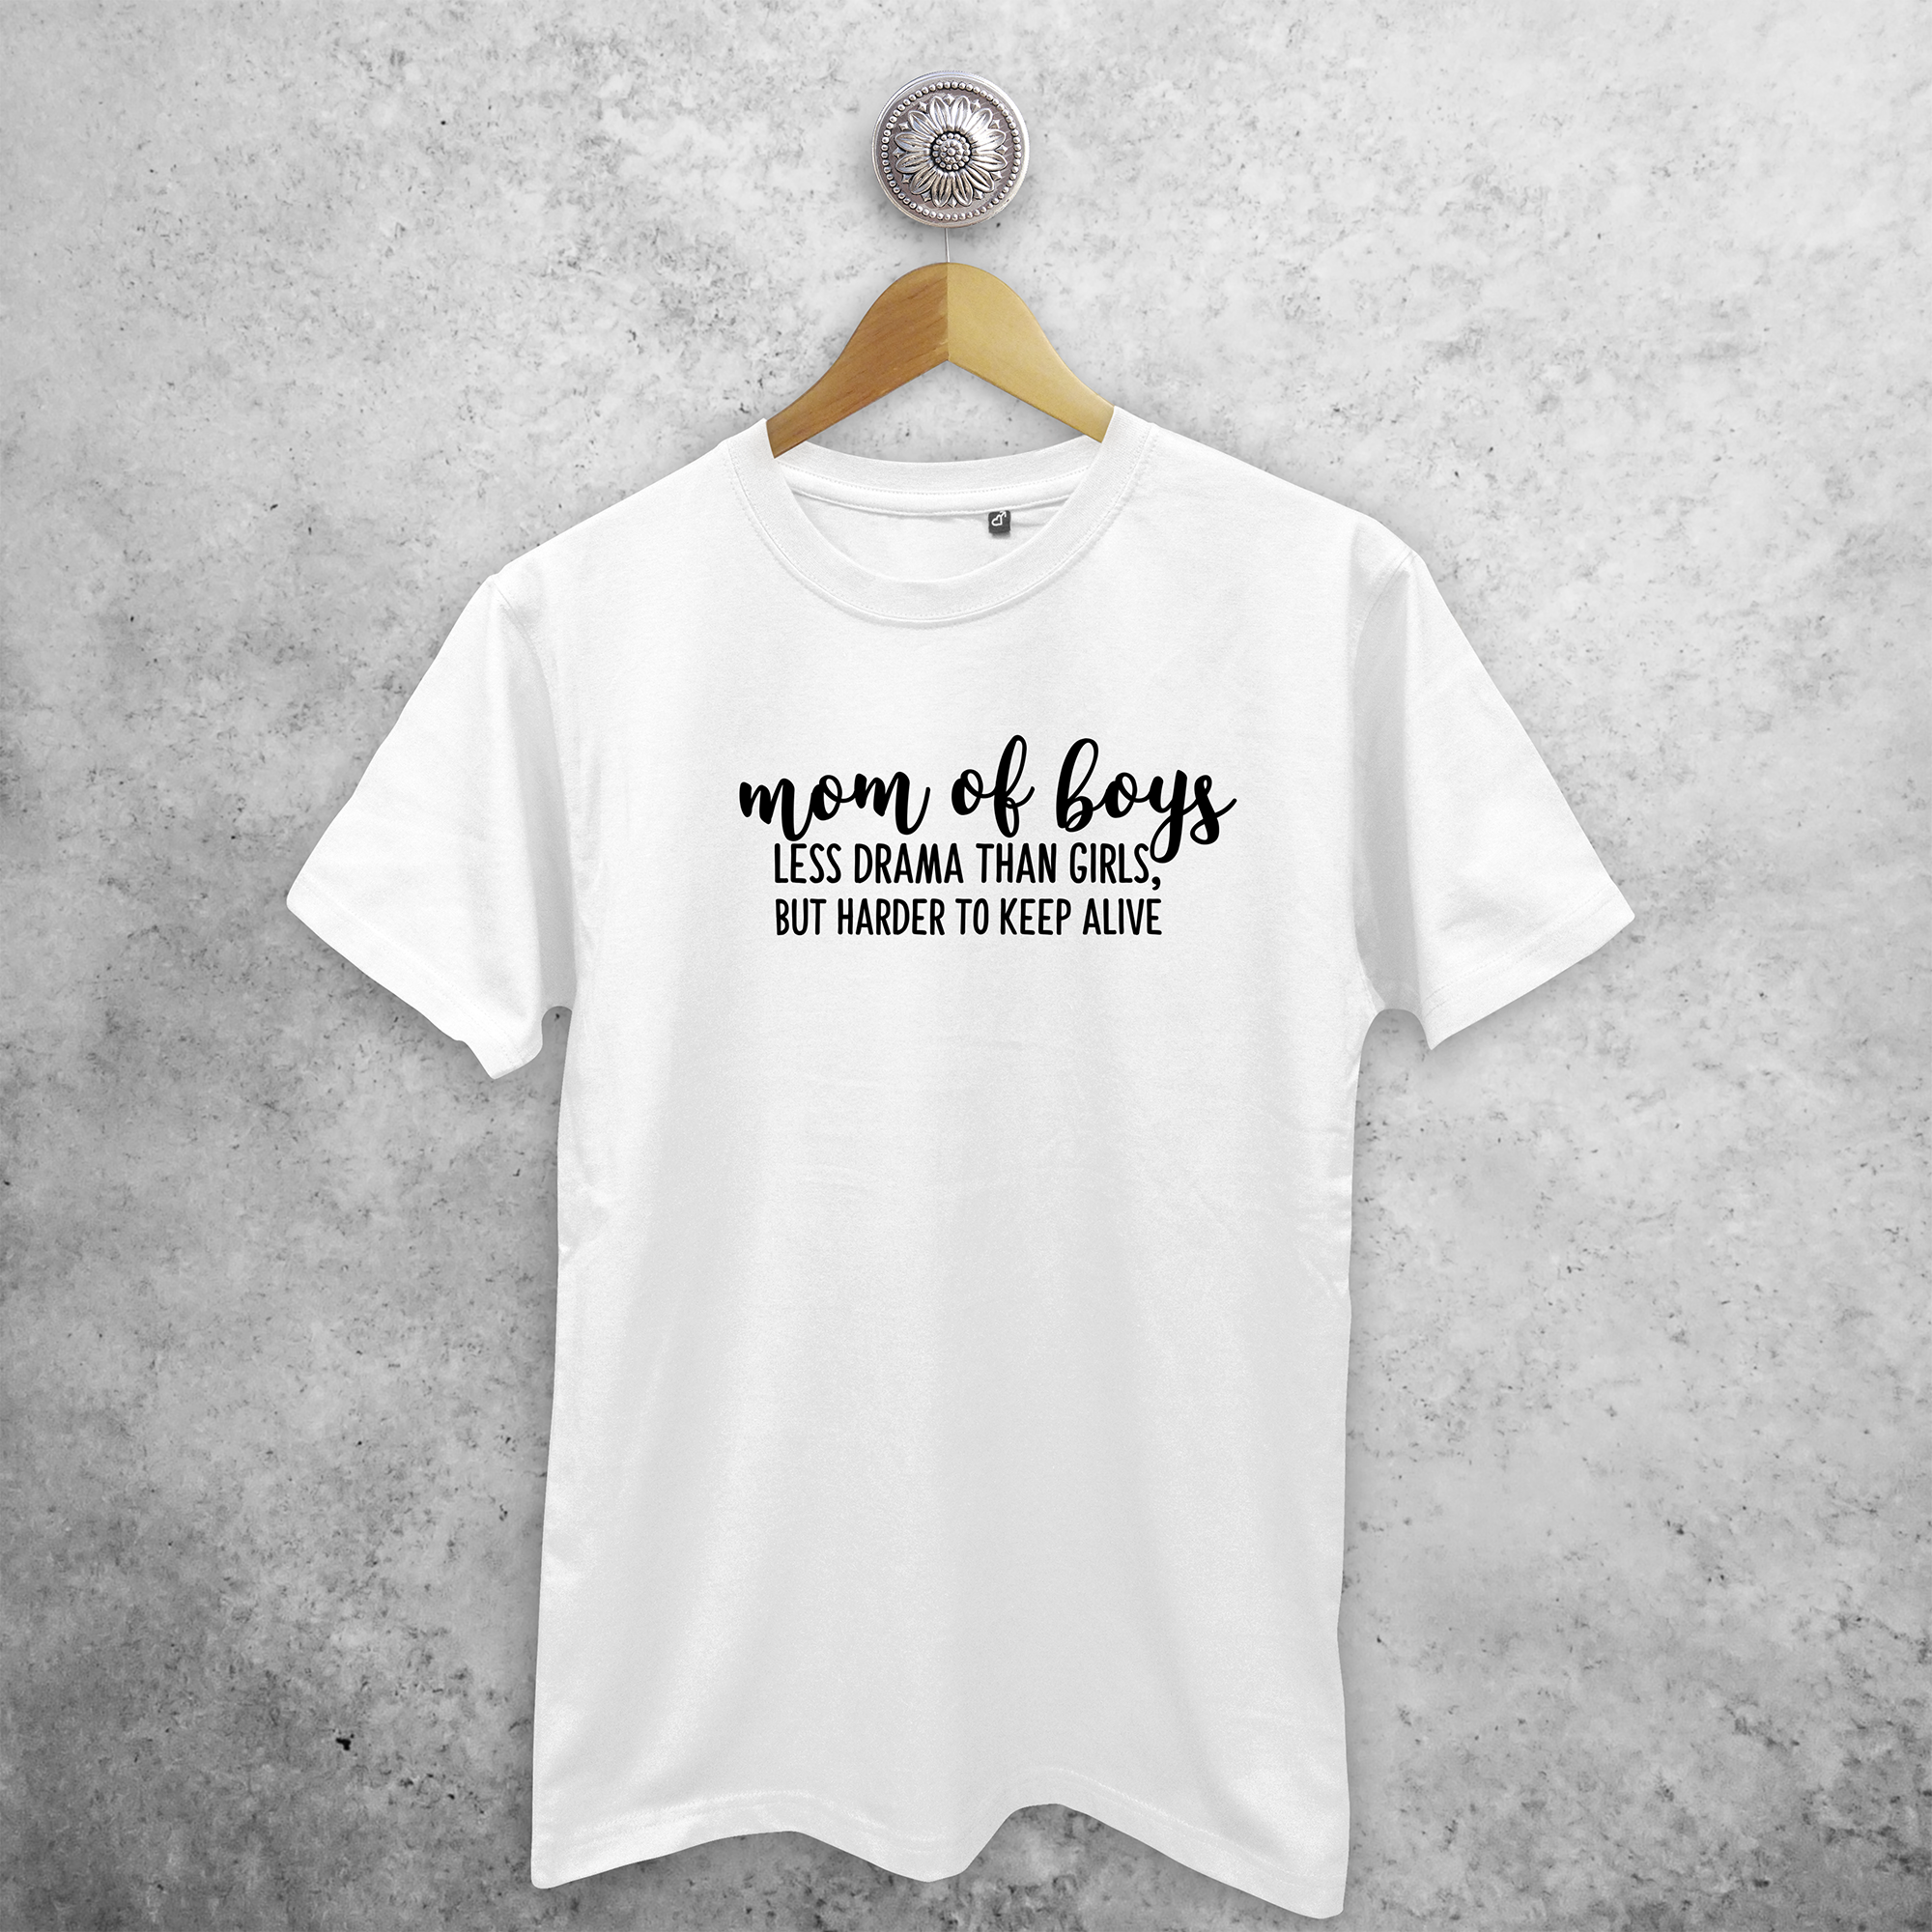 'Mom of boys - Less drama than girls, but harder to keep alive' adult shirt